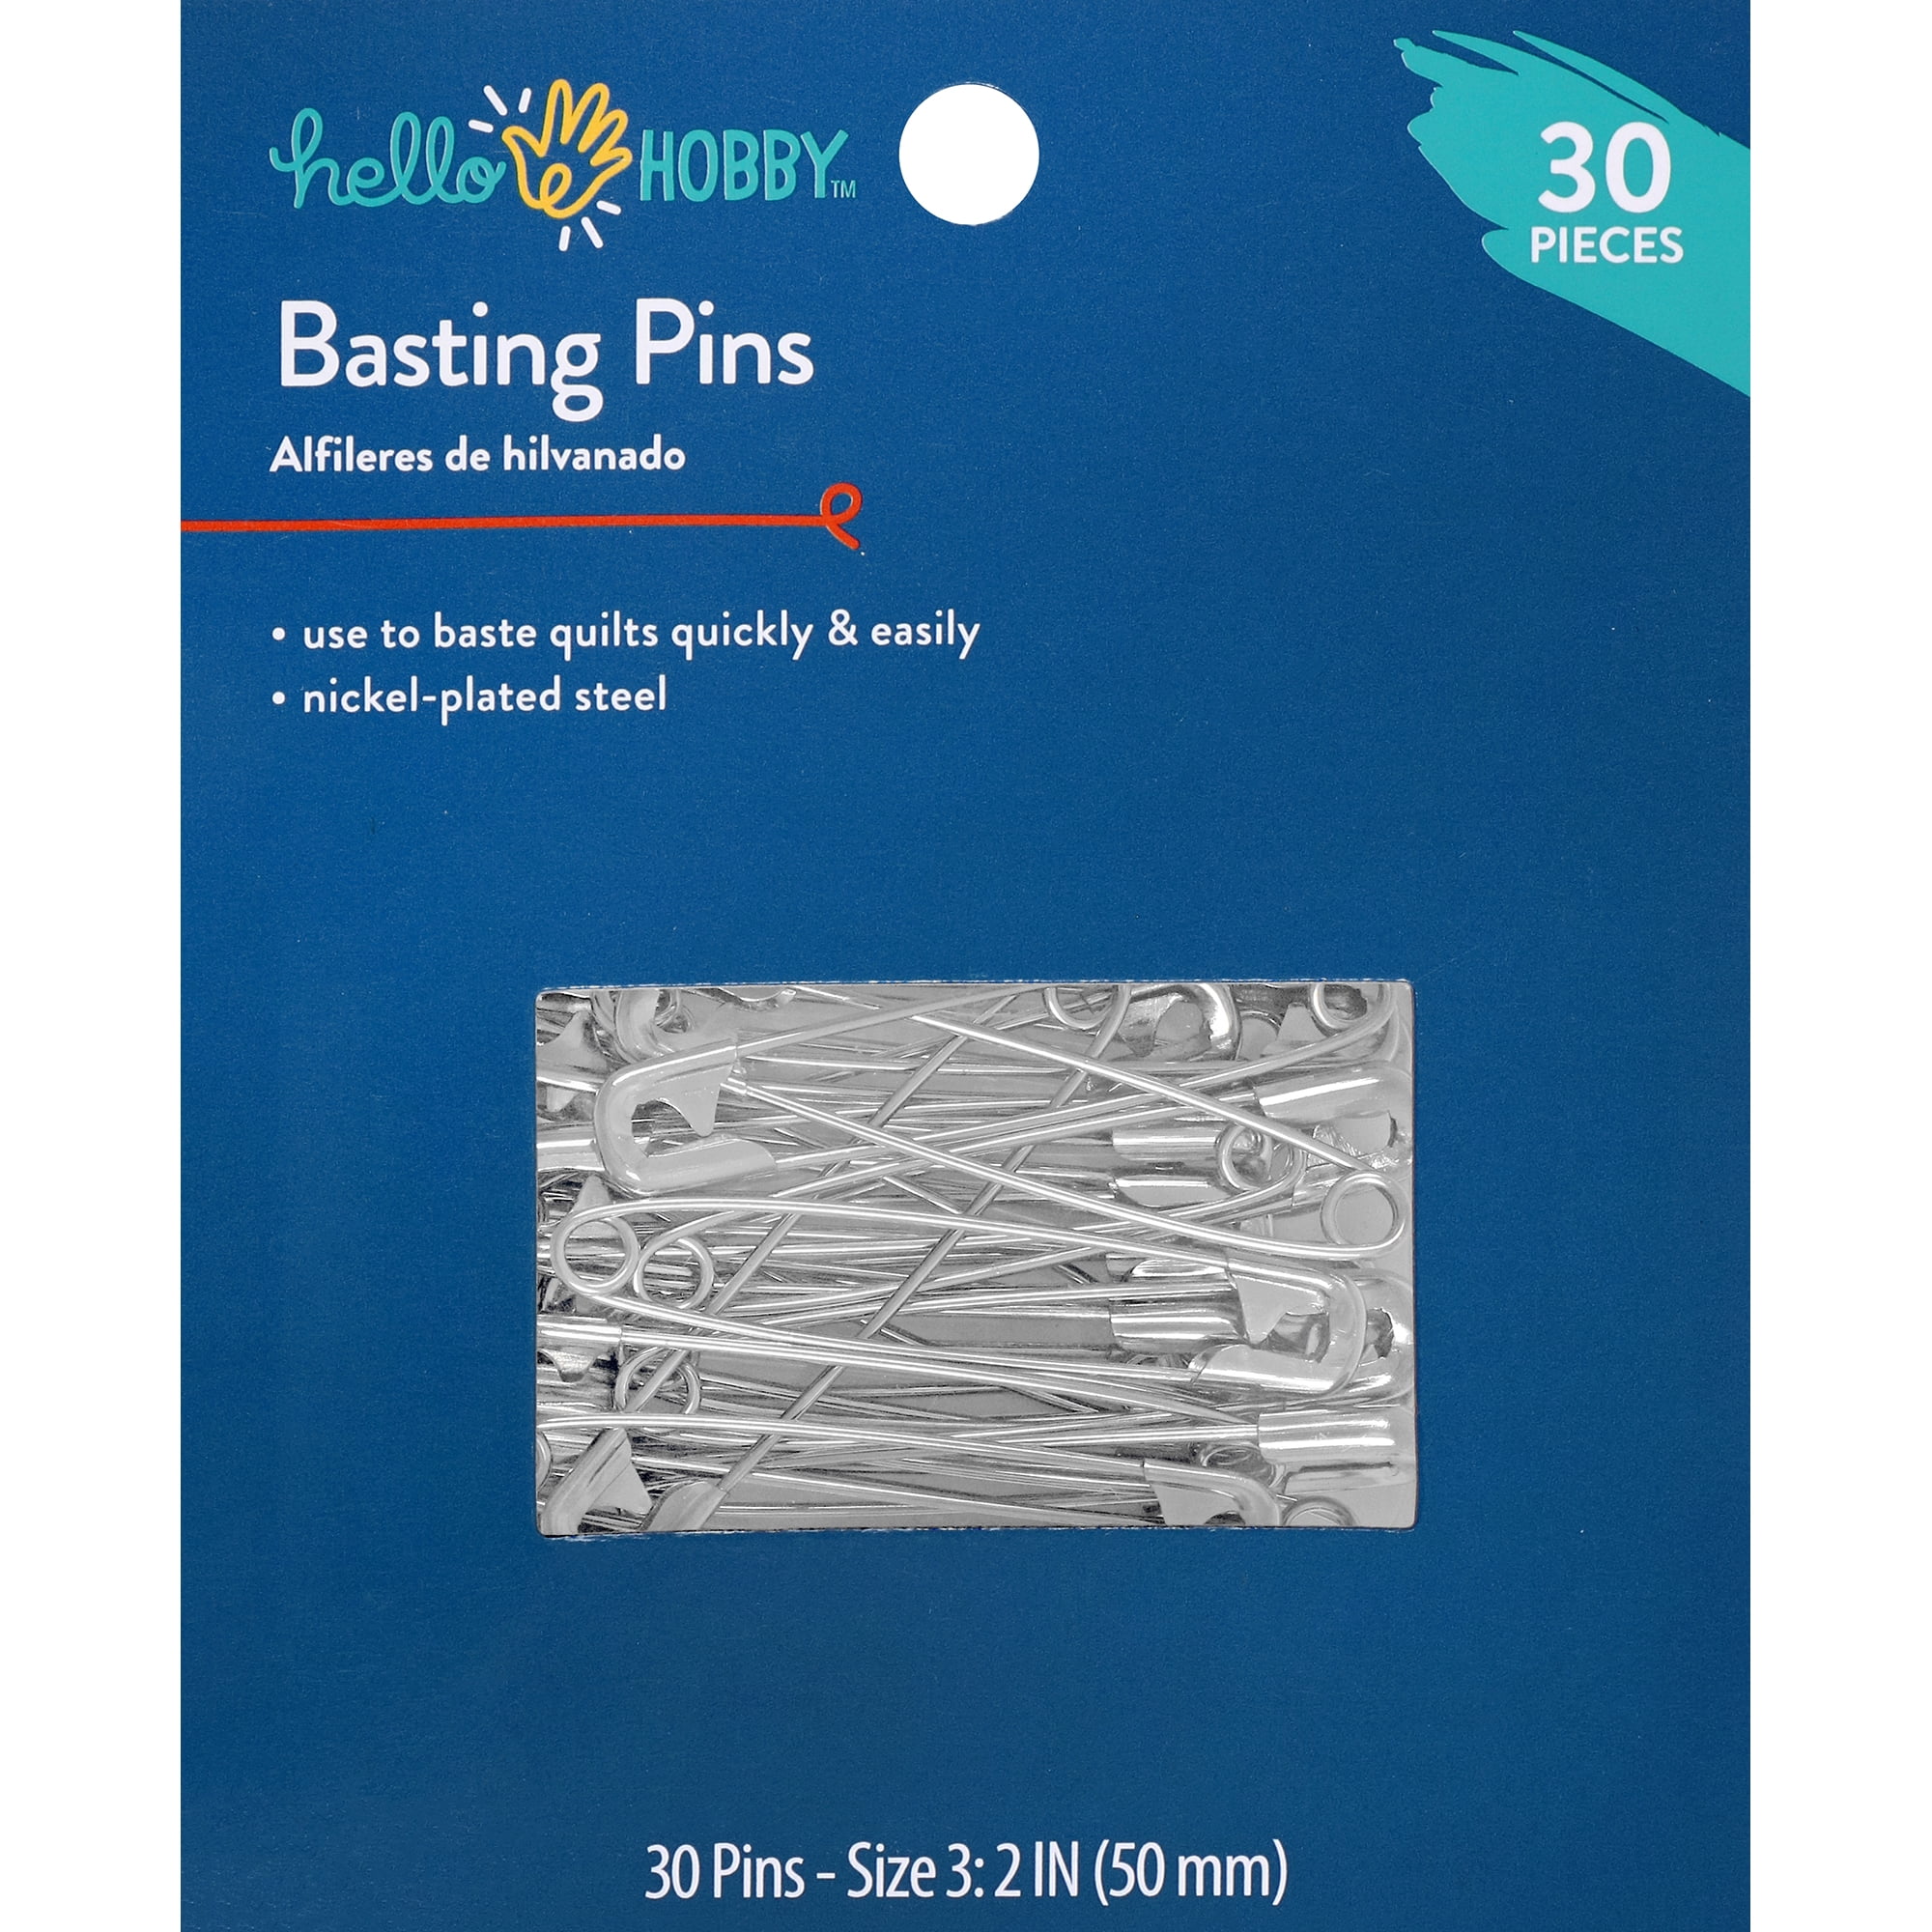 Hello Hobby Size 3 Basting Pins (30 Count)